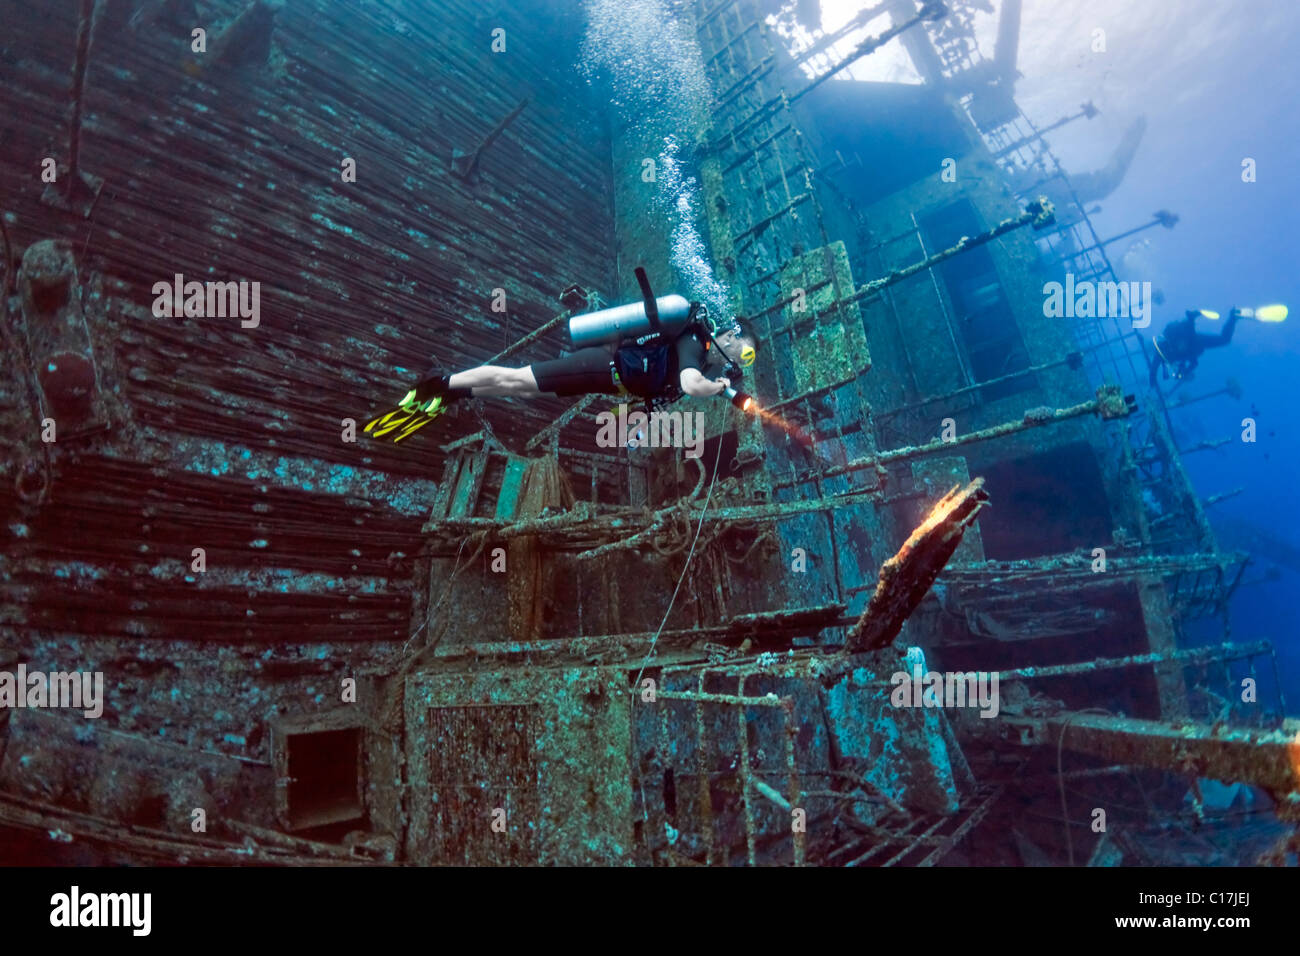 A scuba diver illuminates some wreckage on the deck of the sunken ferry shipwreck Salem Express on Hyndman Reef in the Red Sea. Stock Photo